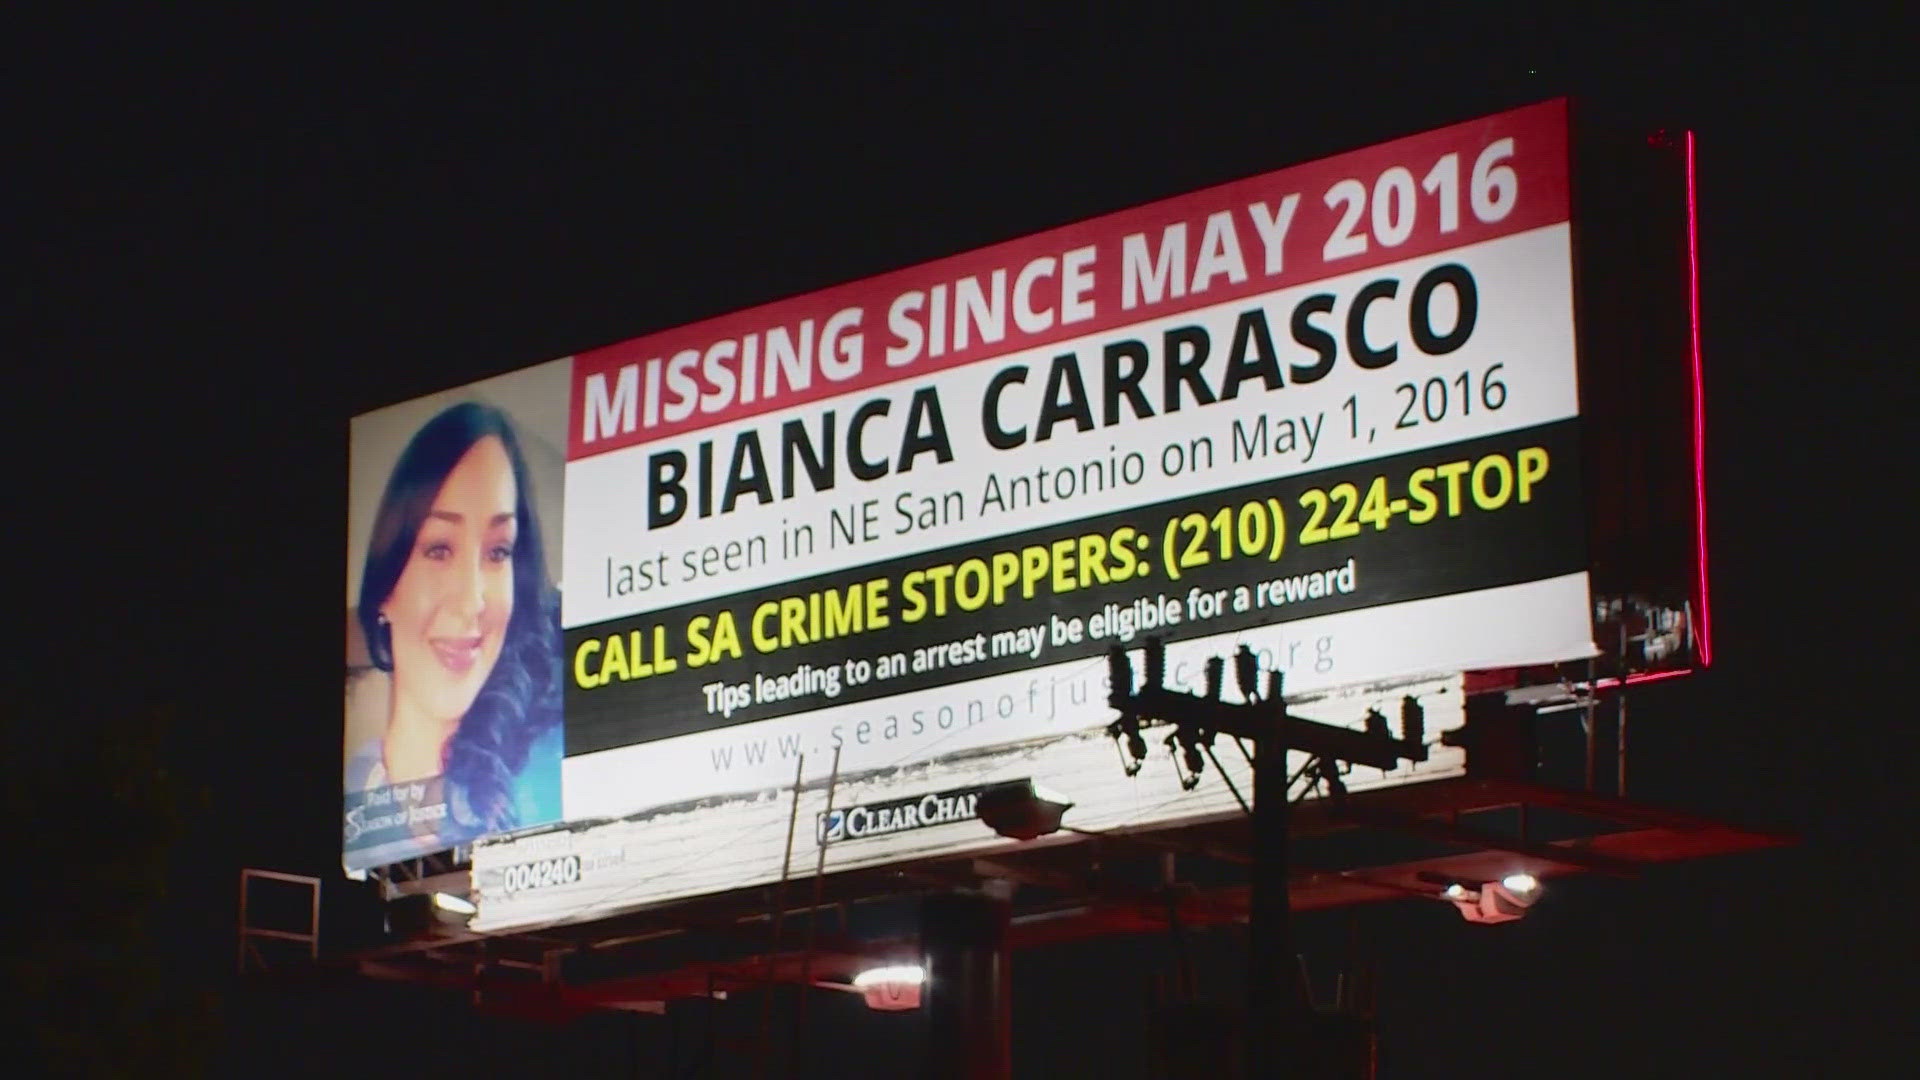 Bianca Carrasco was last seen leaving her northeast-side home, on May 1, 2016, after having an argument with her husband, she was never seen again.